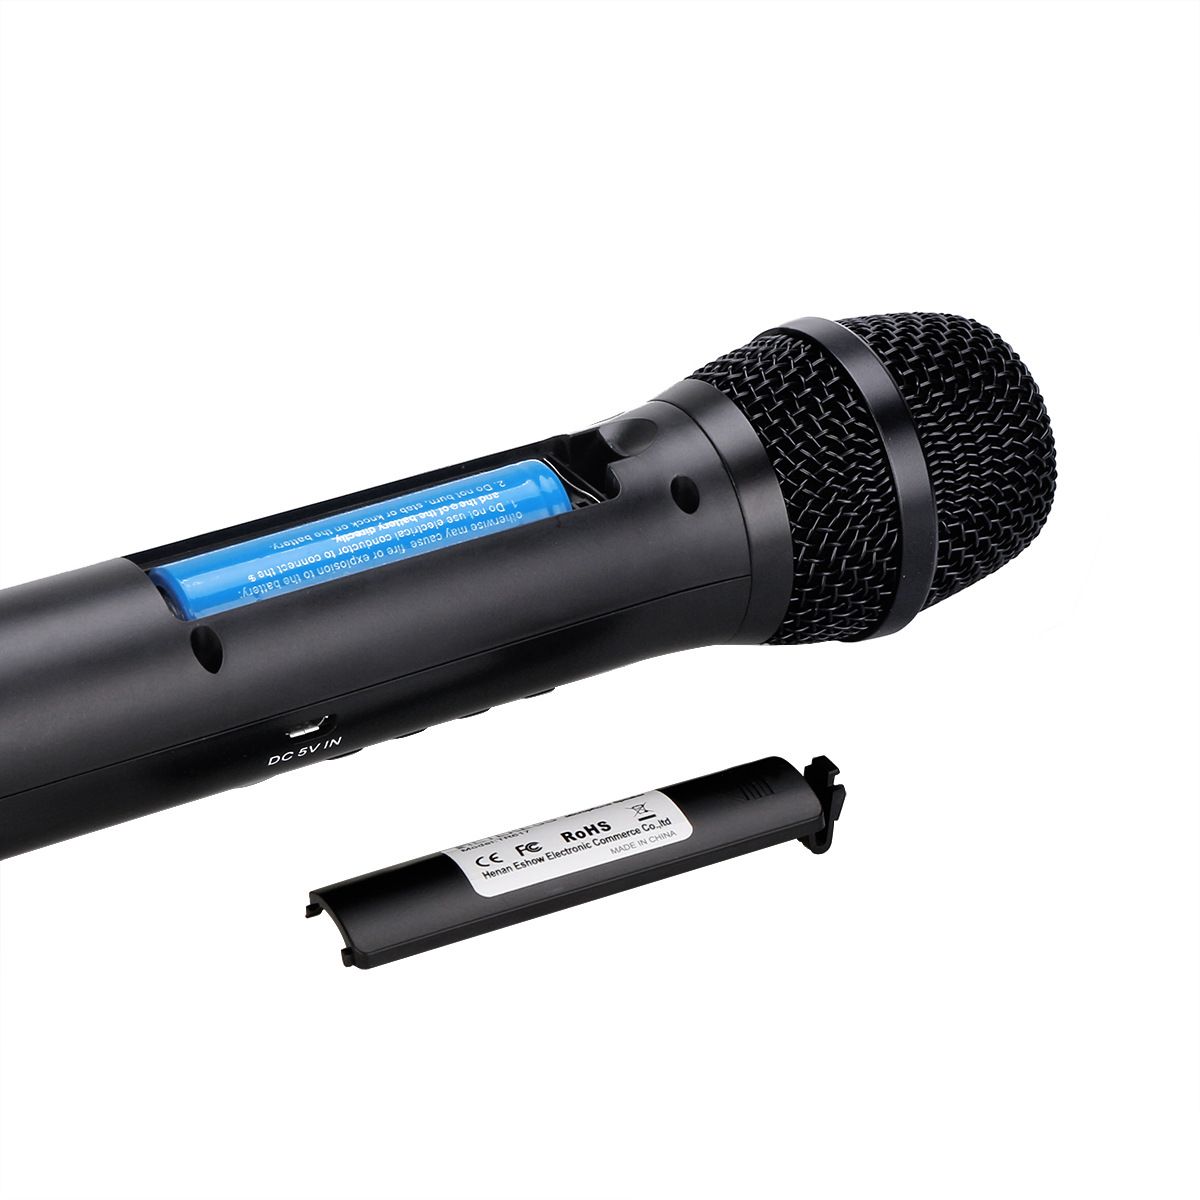 RETEKESS-TR617-bluetooth-Wireless-Microphone-for-Live-Broadcast-Built-in-Speaker-Music-Player-Mic-fo-1618919